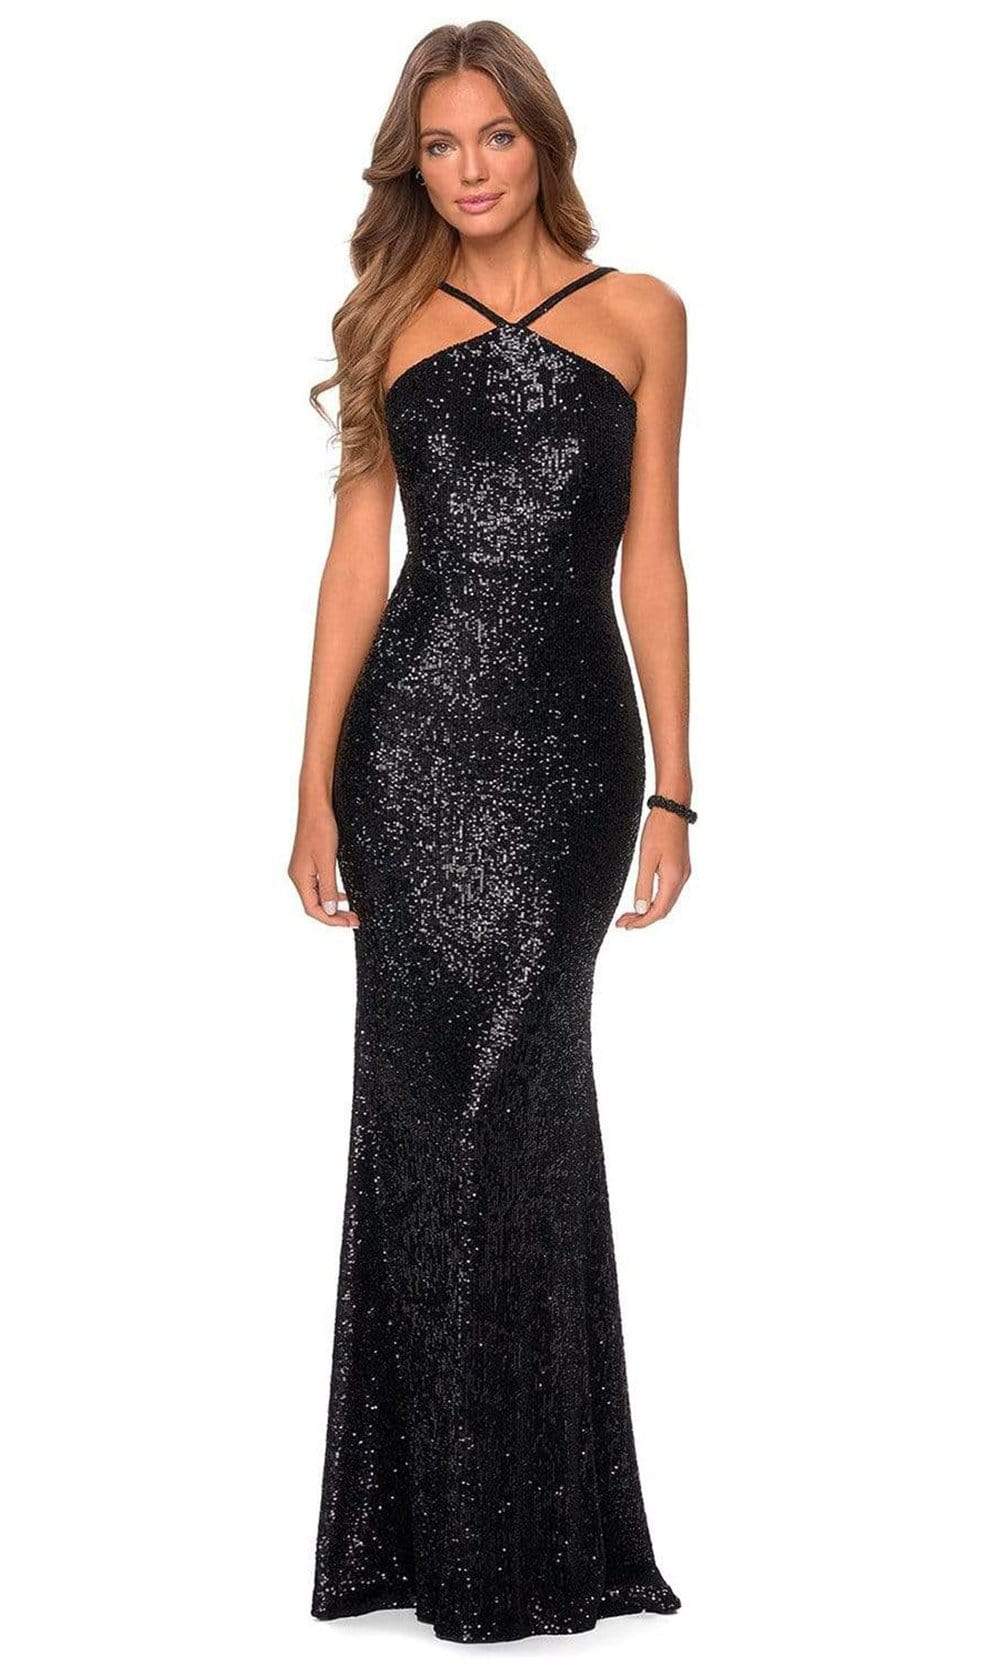 Image of La Femme - 28650 Backless Pyramid Neck Sequin Evening Gown